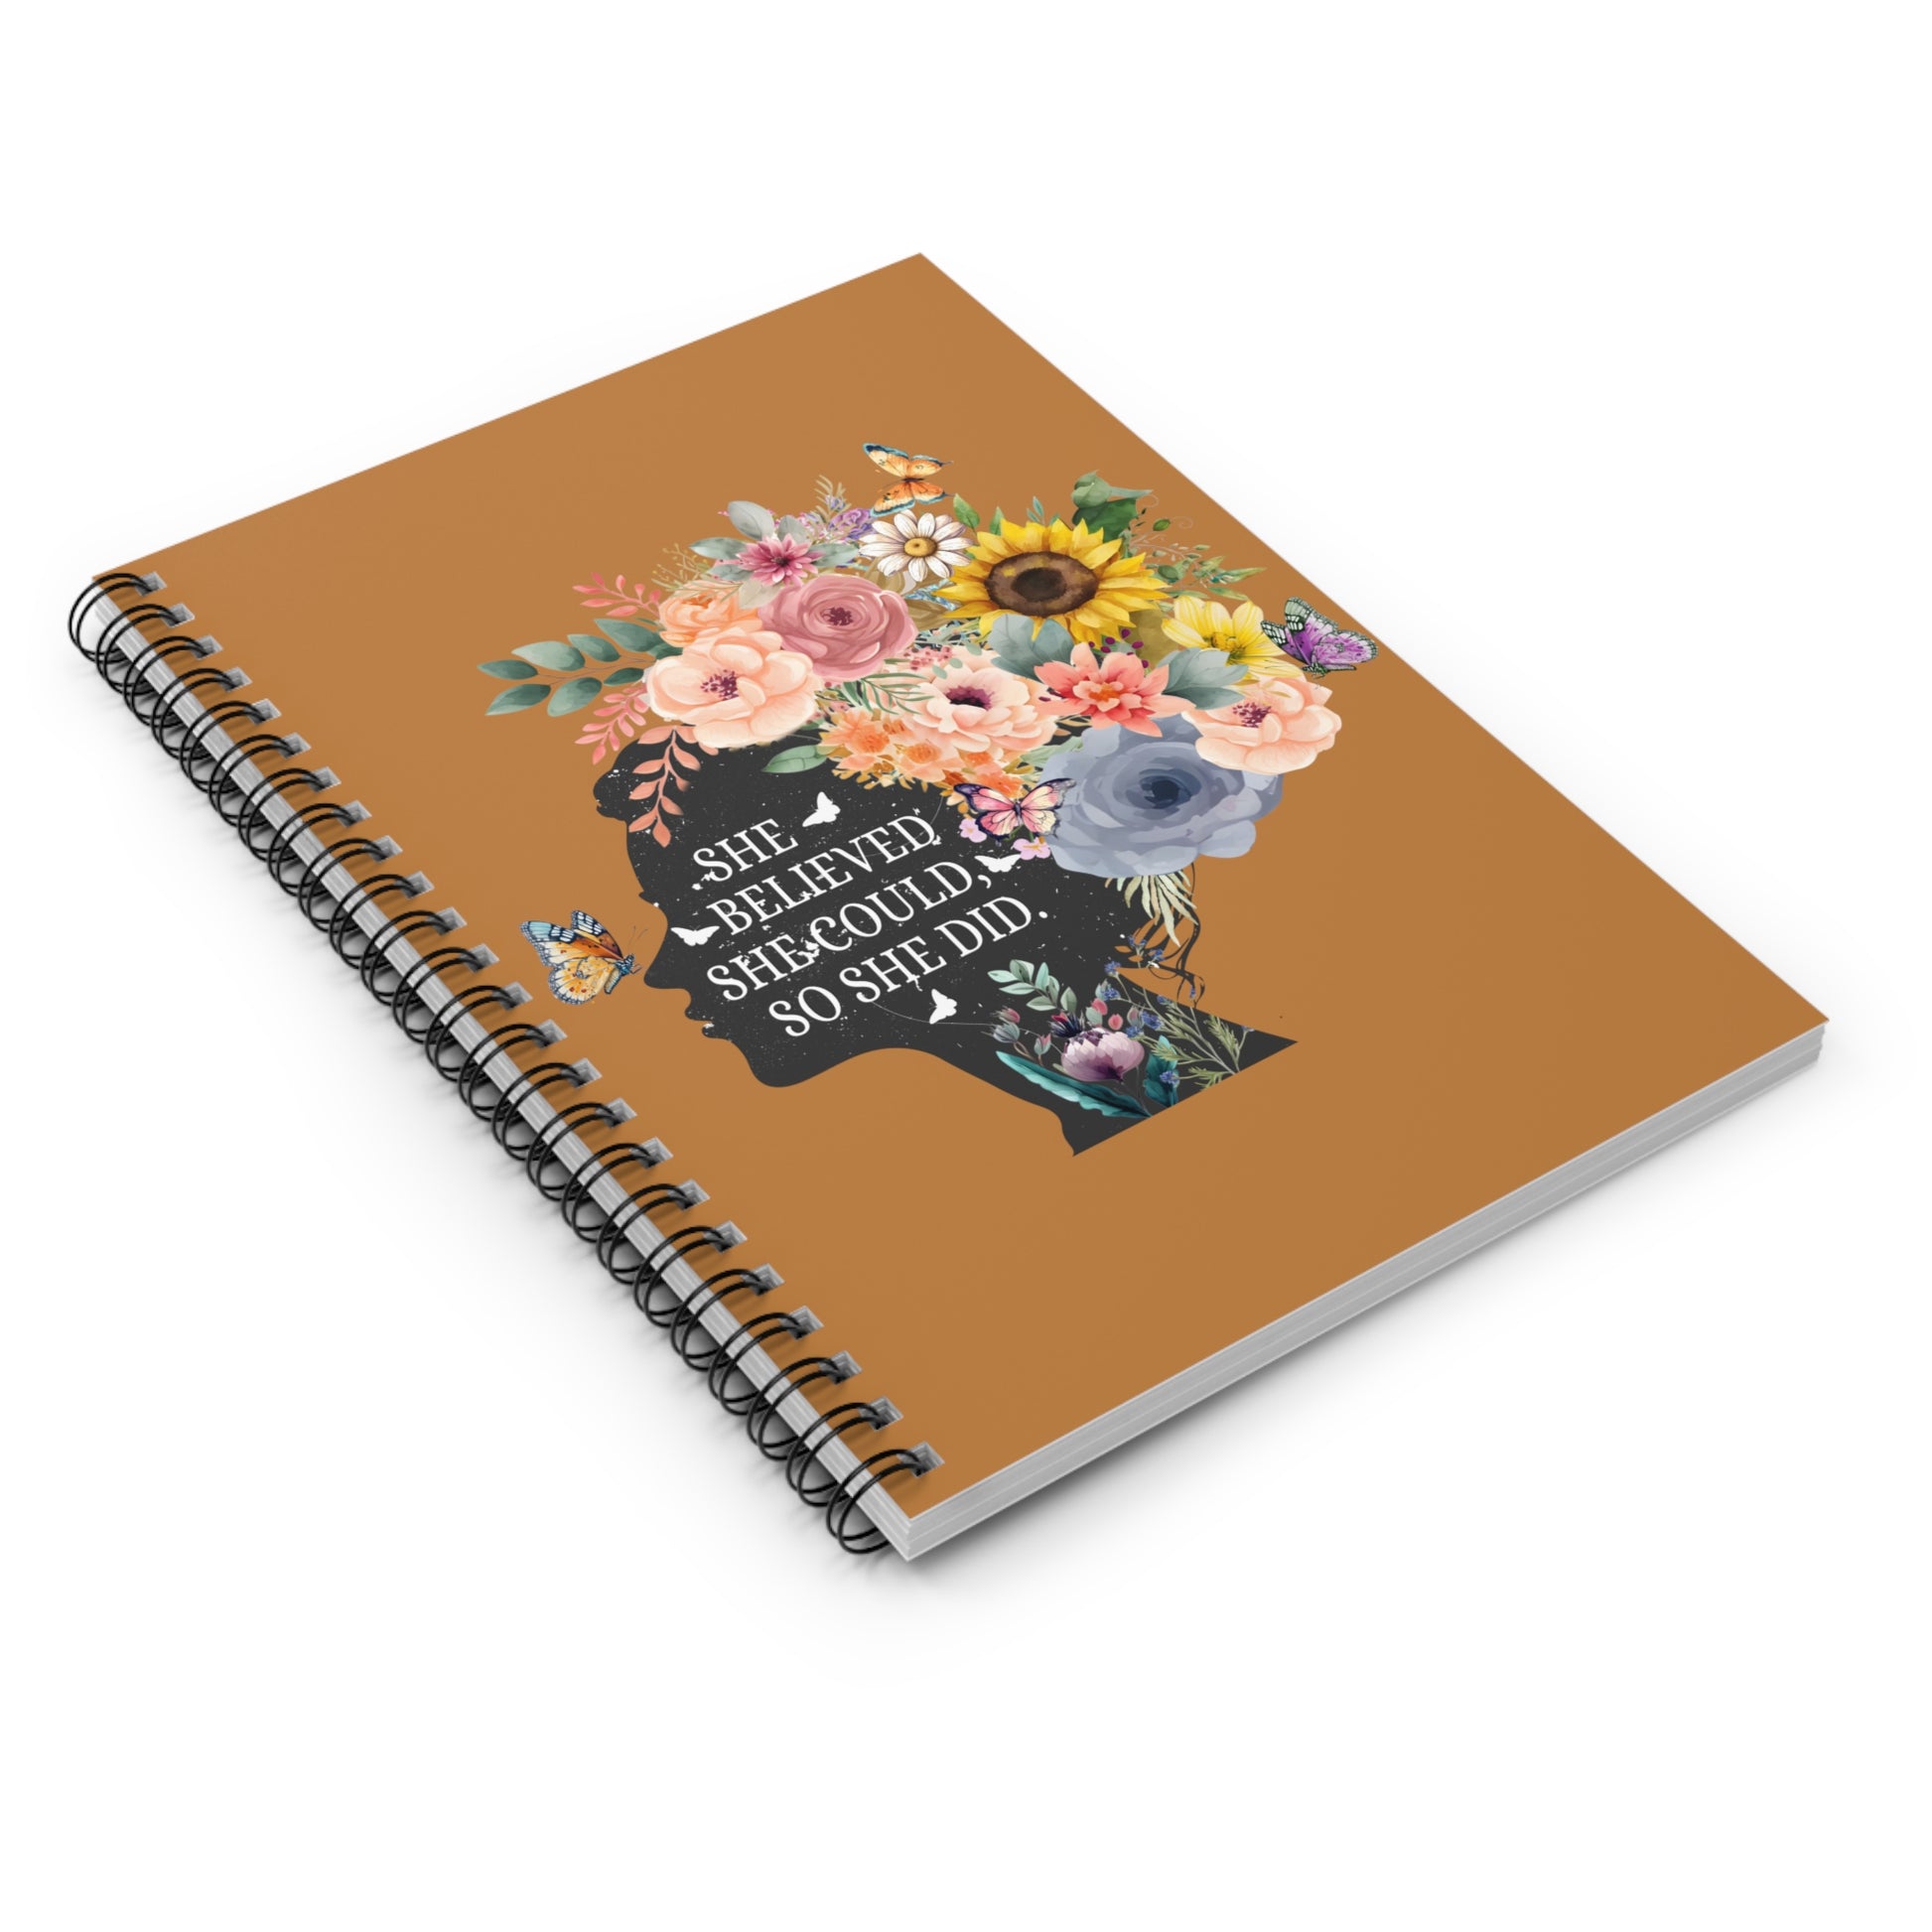 She Believed She Could: Spiral Notebook - Log Books - Journals - Diaries - and More Custom Printed by TheGlassyLass.com